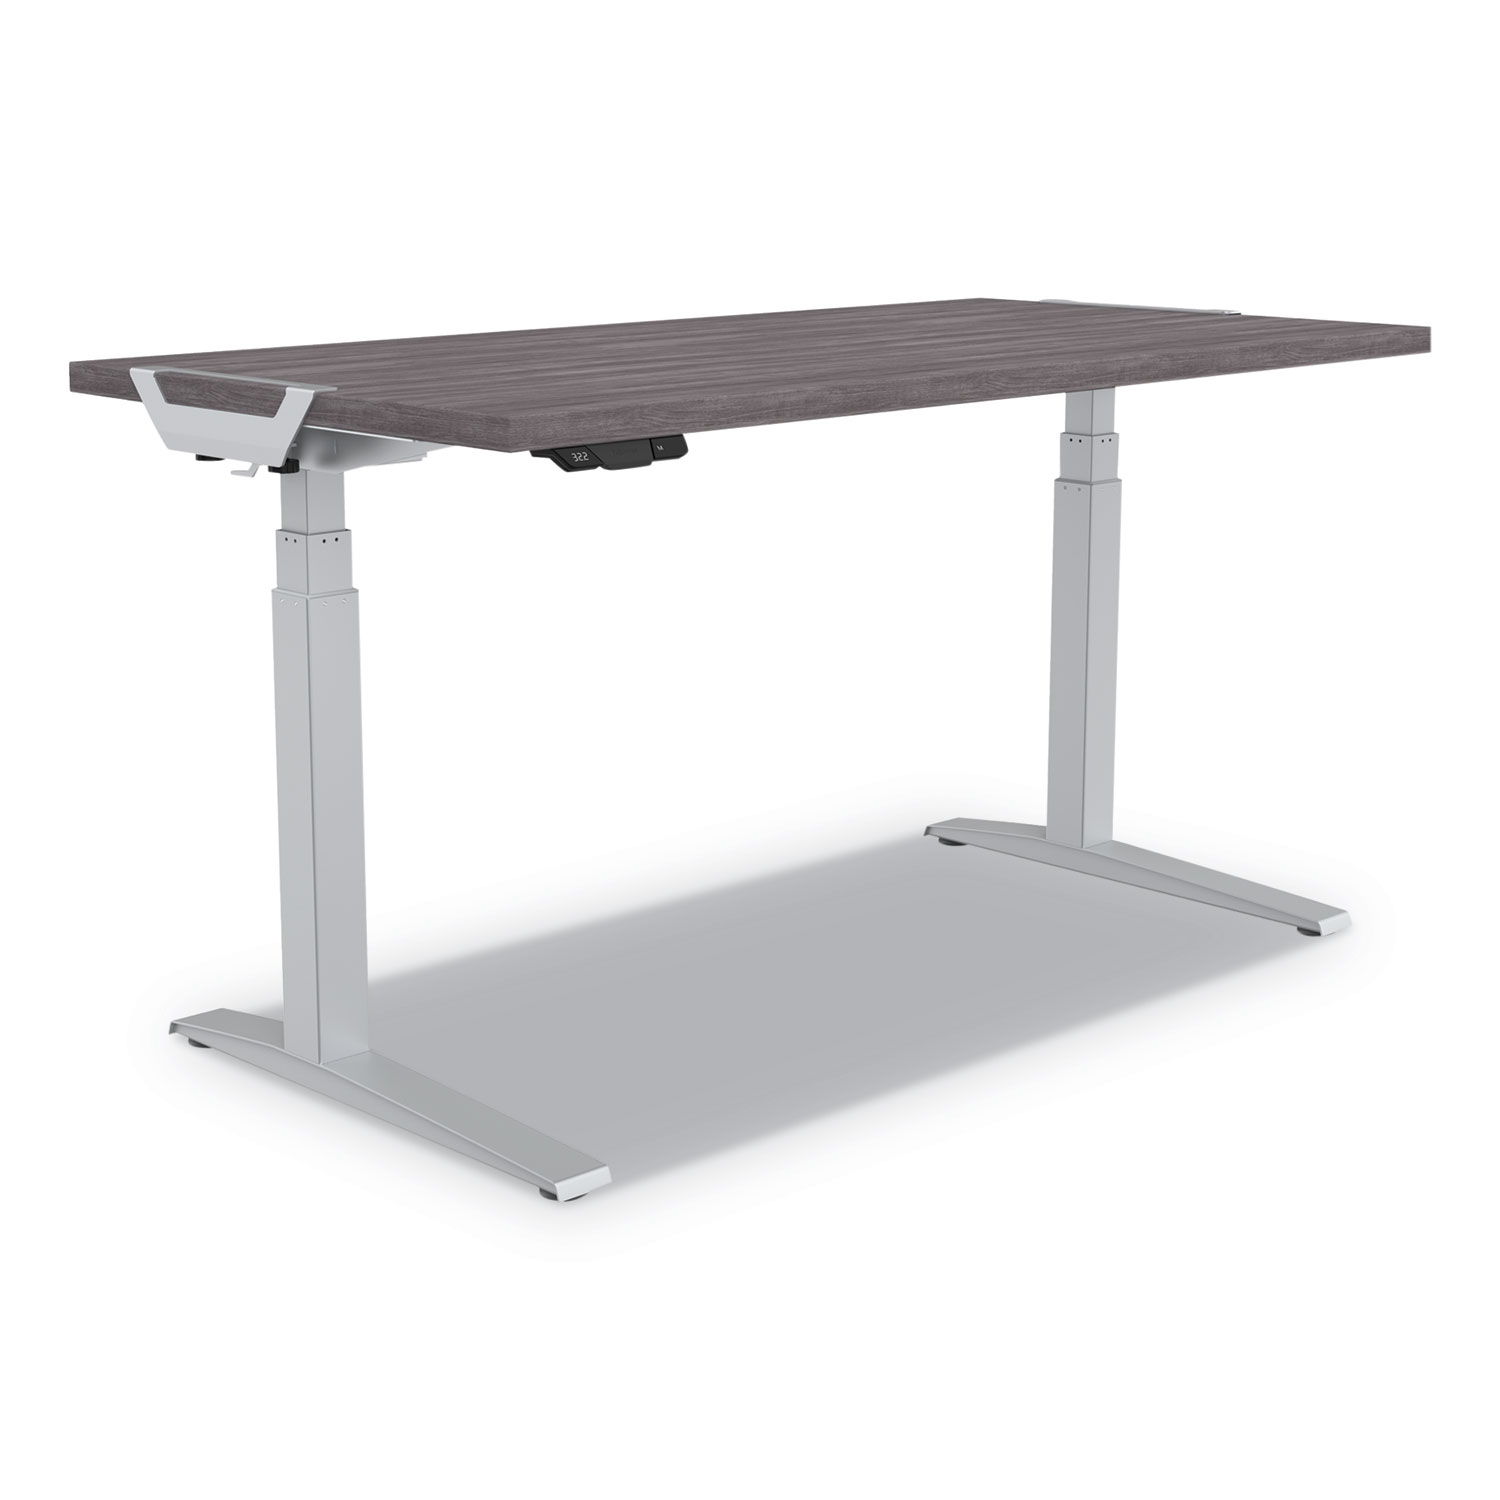 Levado Laminate Table Top (Top Only), 60w x 30d, Gray Ash